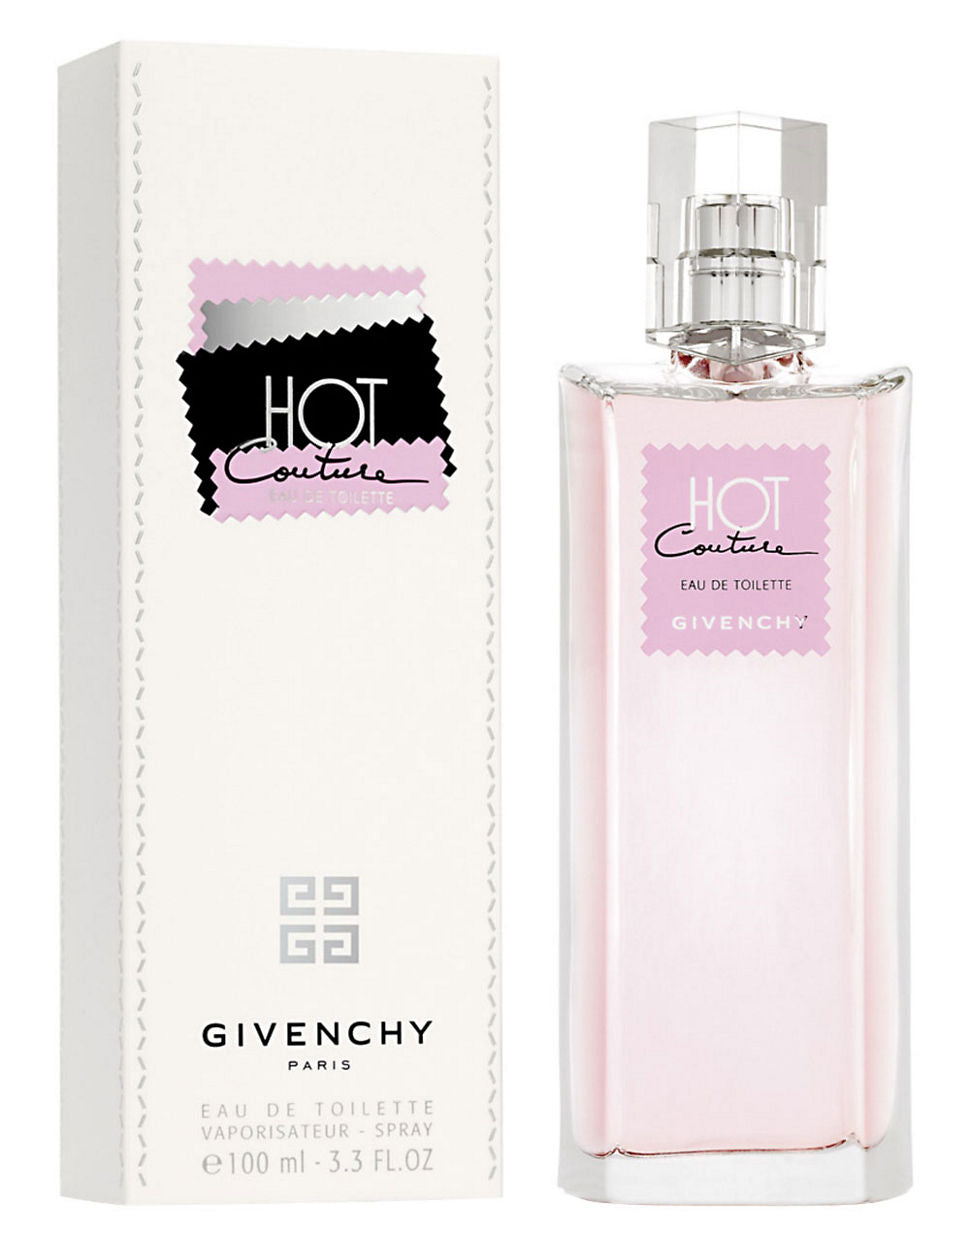 Hot Couture Dama Givenchy 100 ml Edt Spray - PriceOnLine